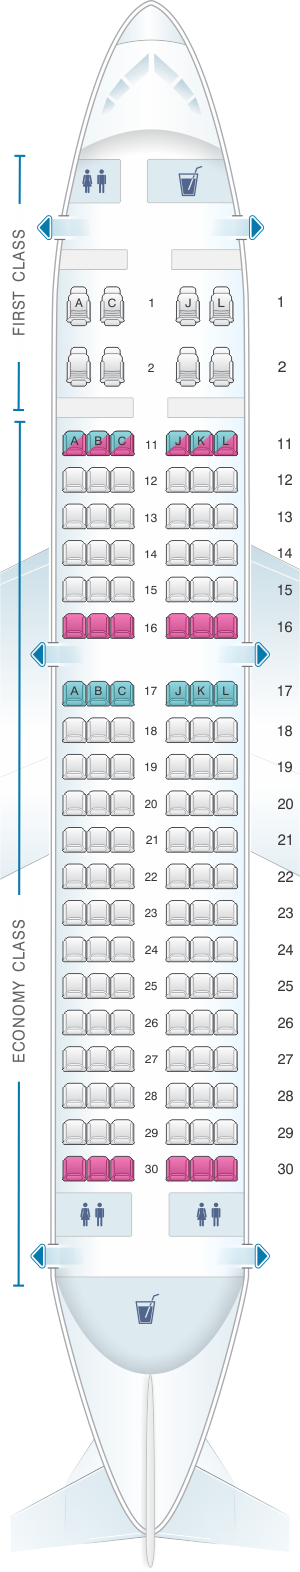 Seat map for Air China Airbus A319 100